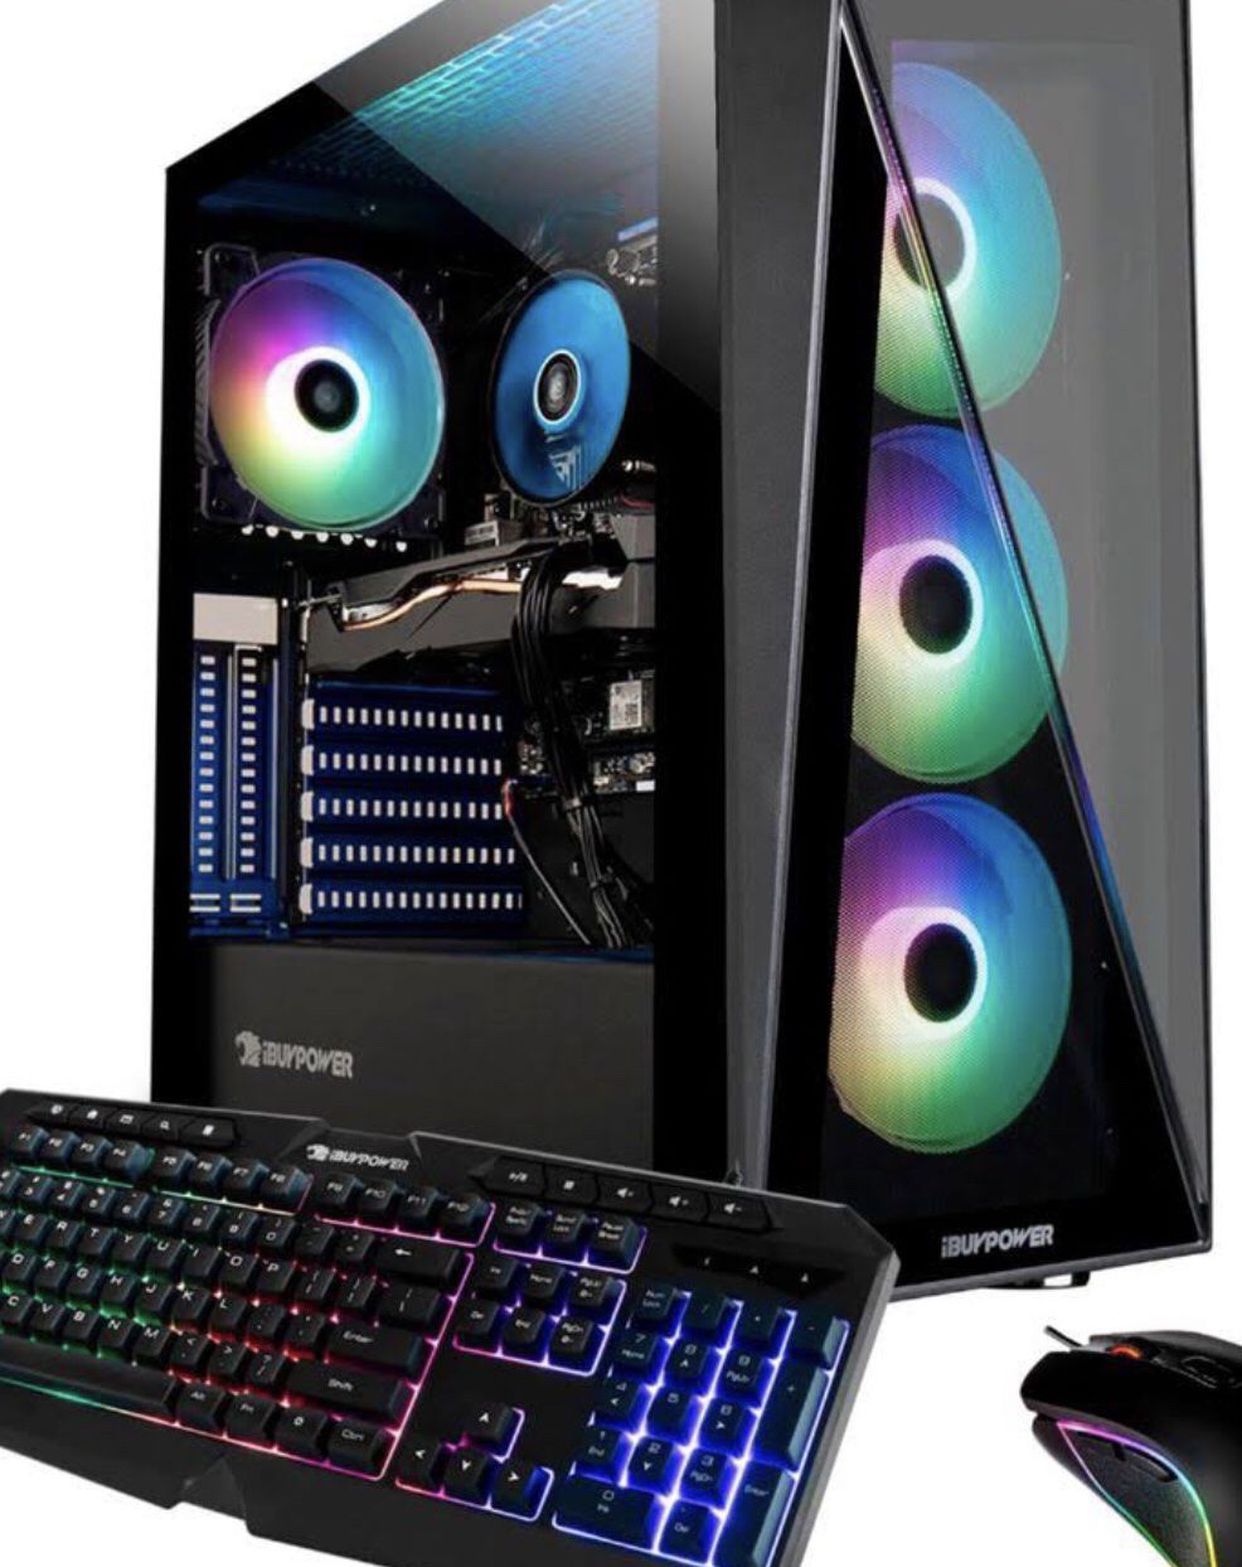 Brand New In Box Ibuypower Gaming Computer And 27 Inch Acre Curved Gaming Monitor Computer Retails For $1299 And Monitor Is $279